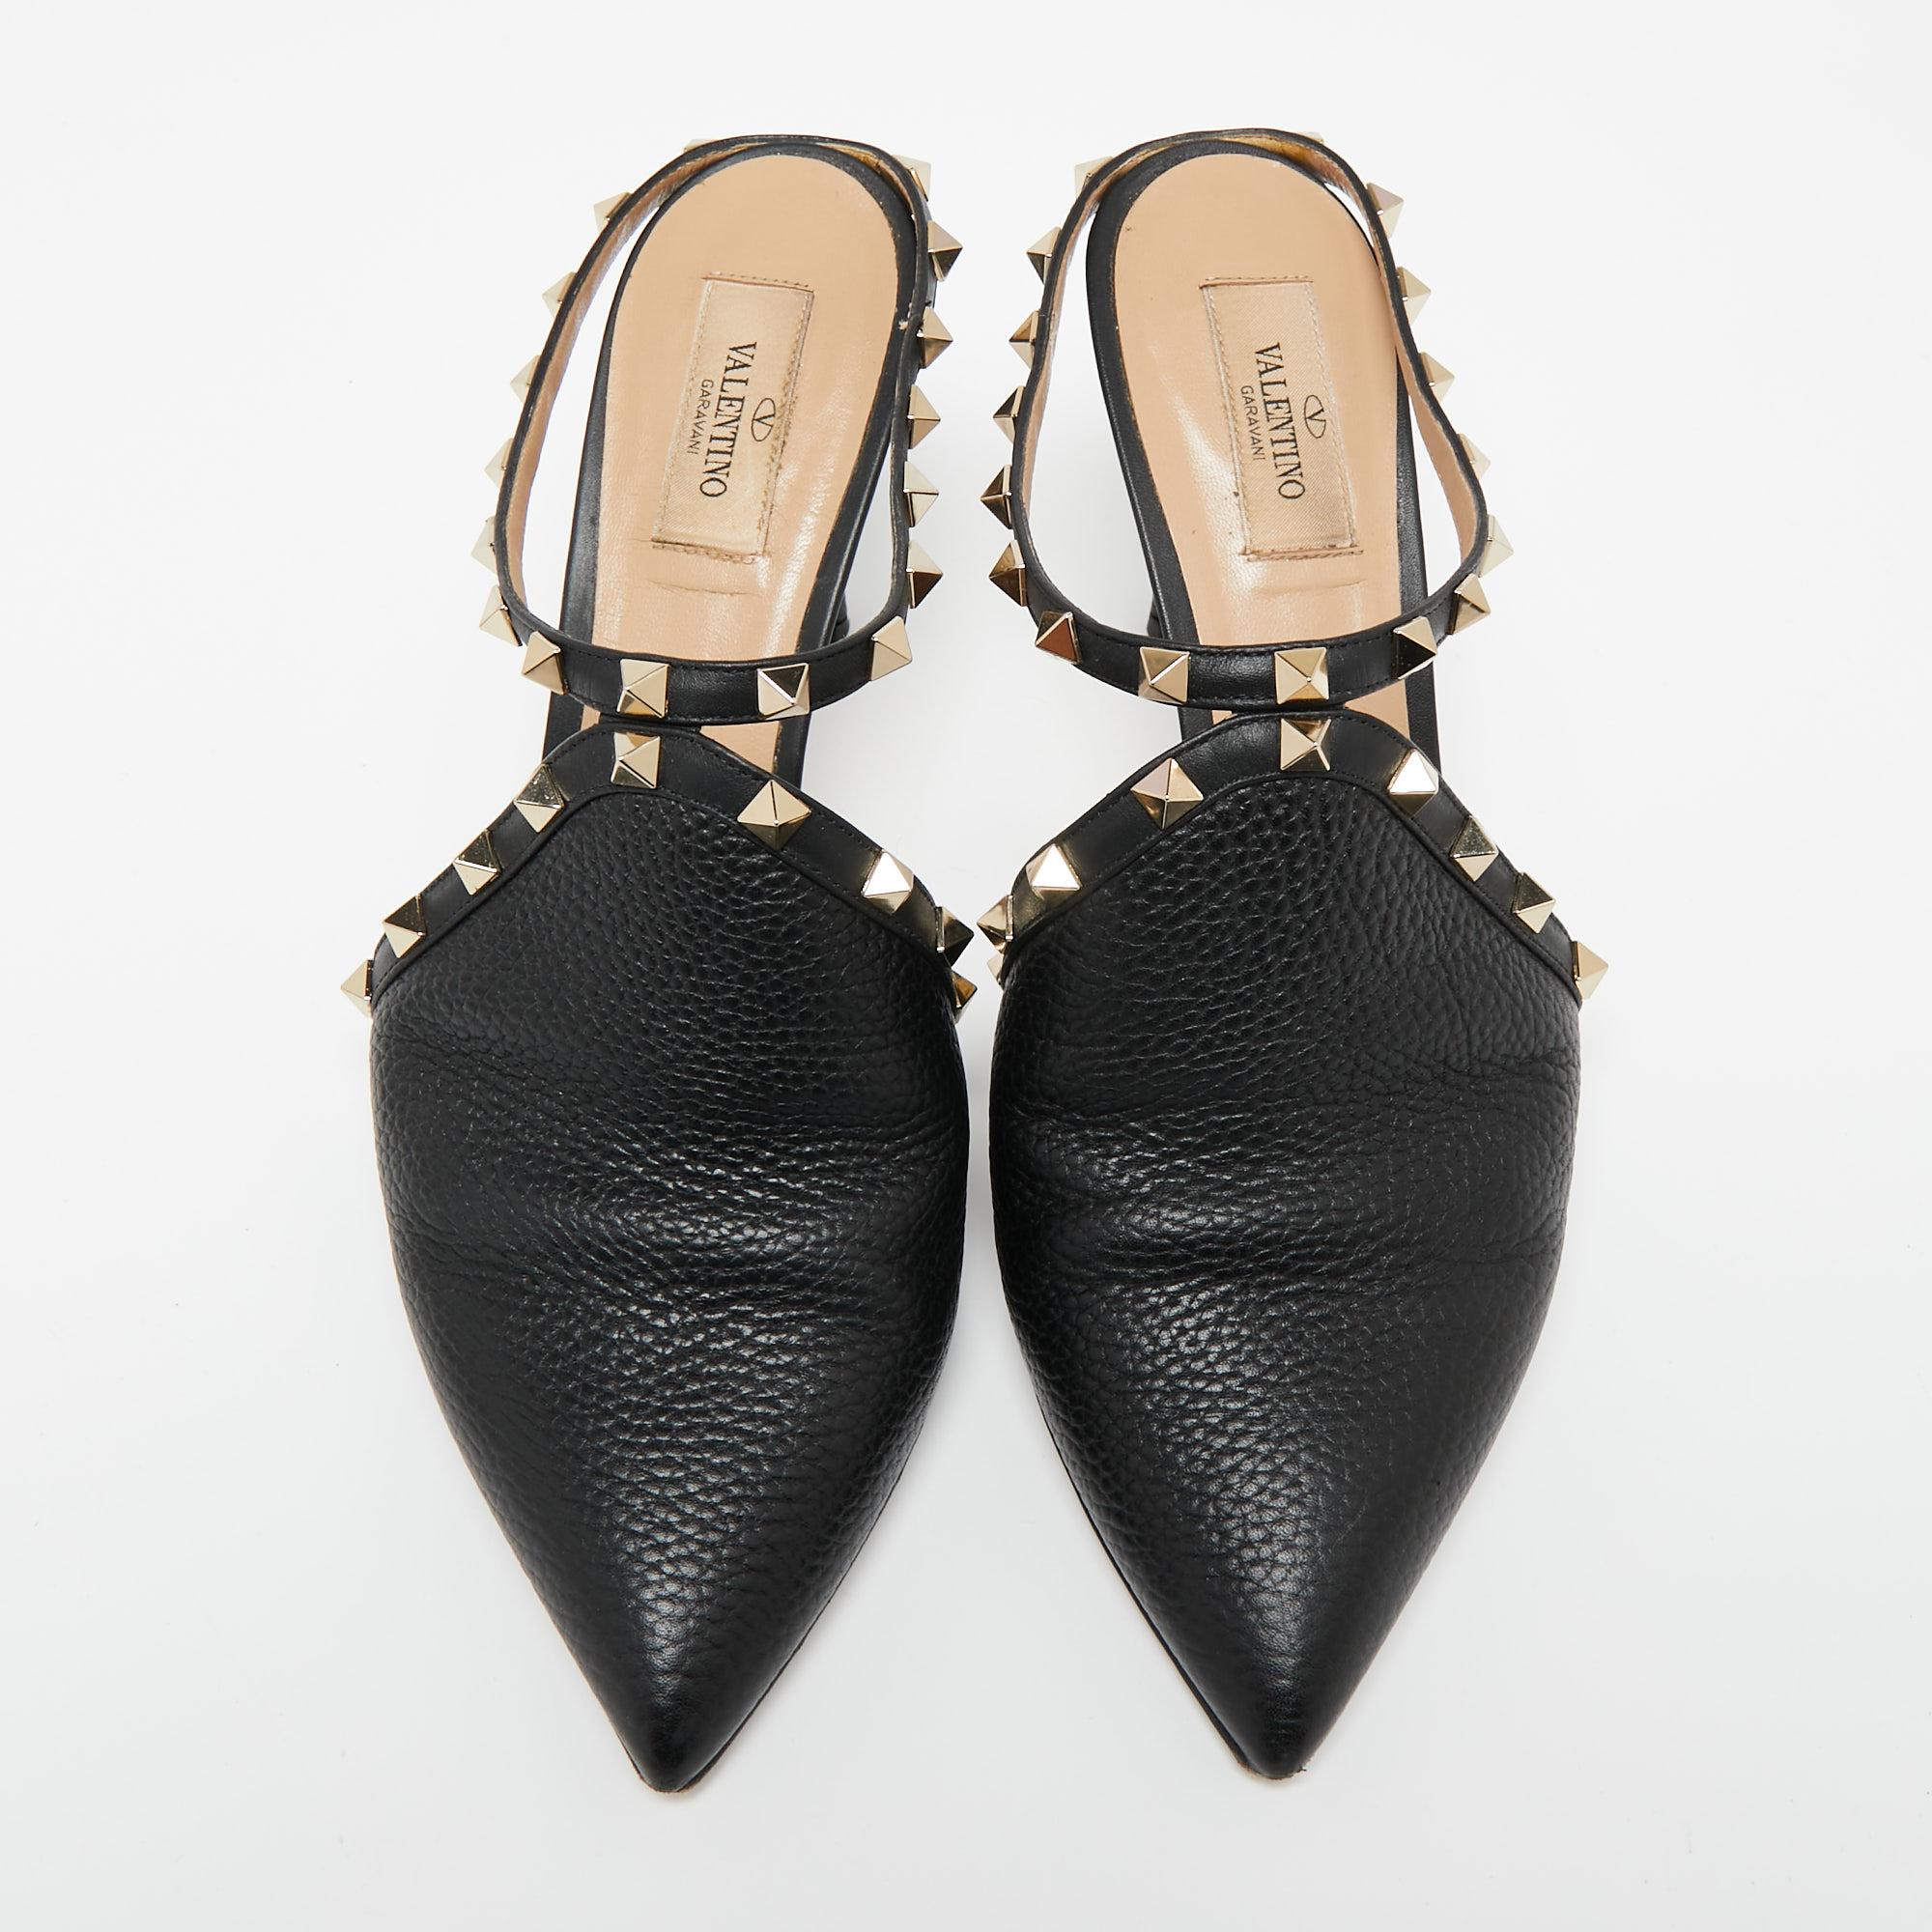 These mule sandals from the House of Valentino are all about class and elegance! They are made from black leather, which is enriched with Rockstud embellishments. They have pointed toes, slender heels, and a slip-on feature. Flaunt your chic style